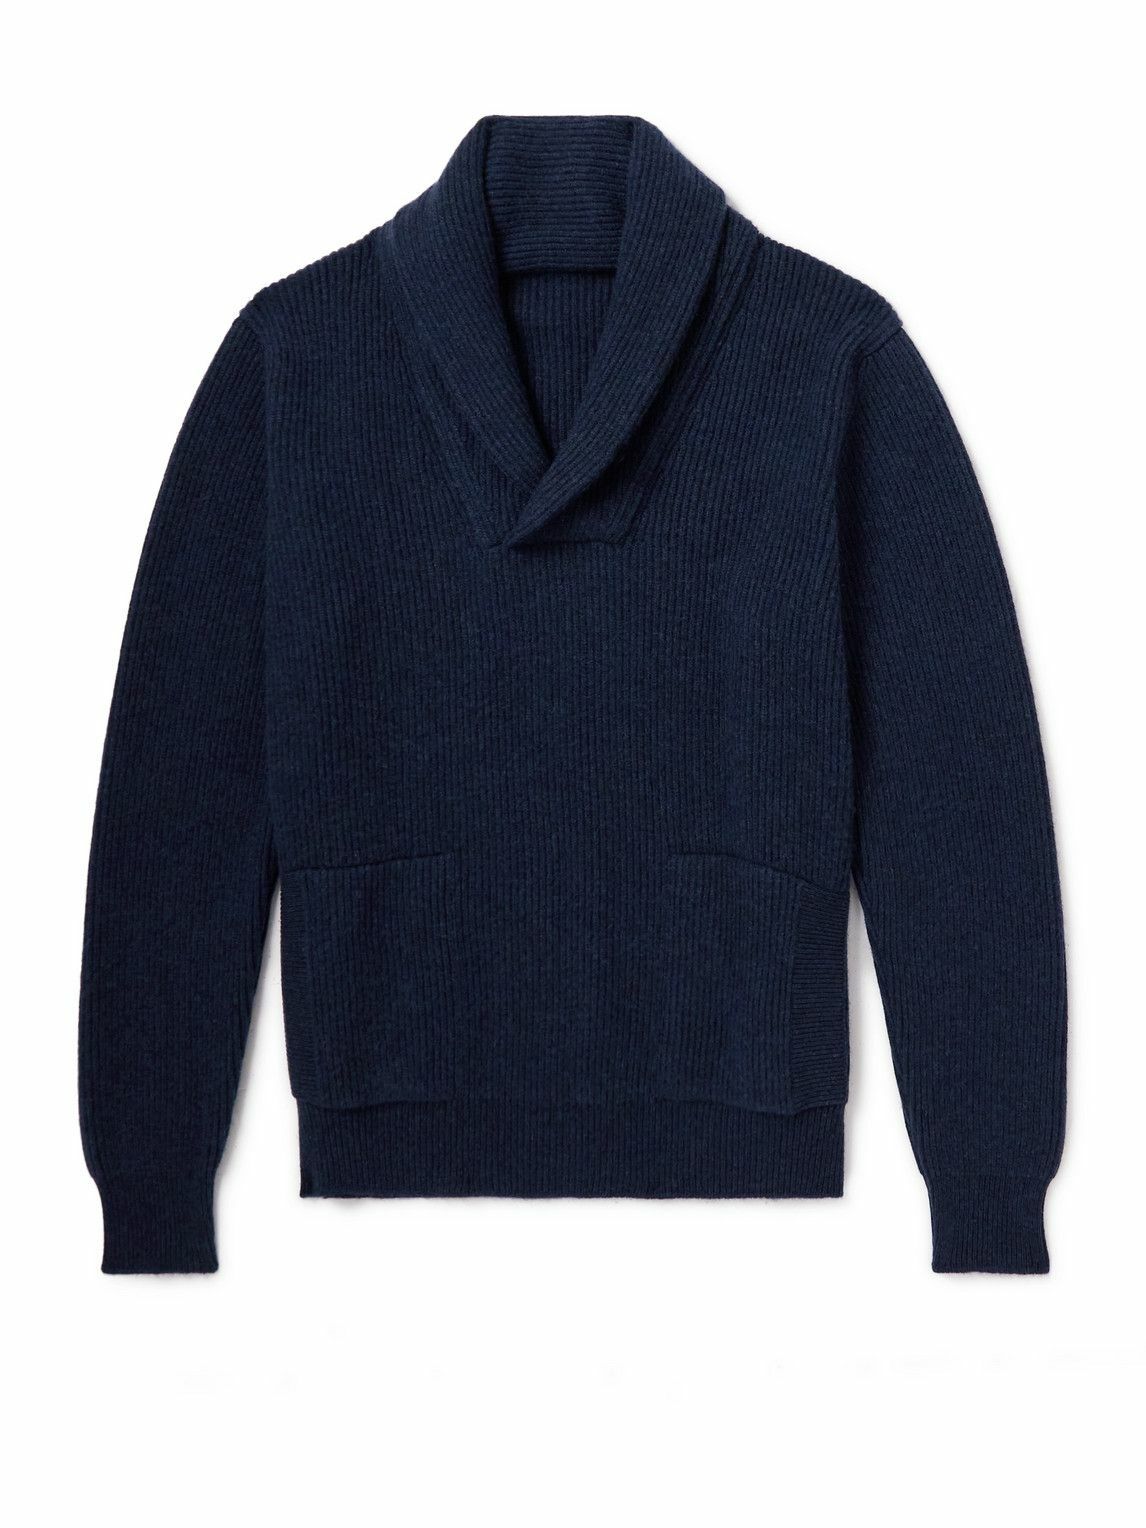 Anderson & Sheppard - Shawl-Collar Ribbed Cashmere Sweater - Blue ...